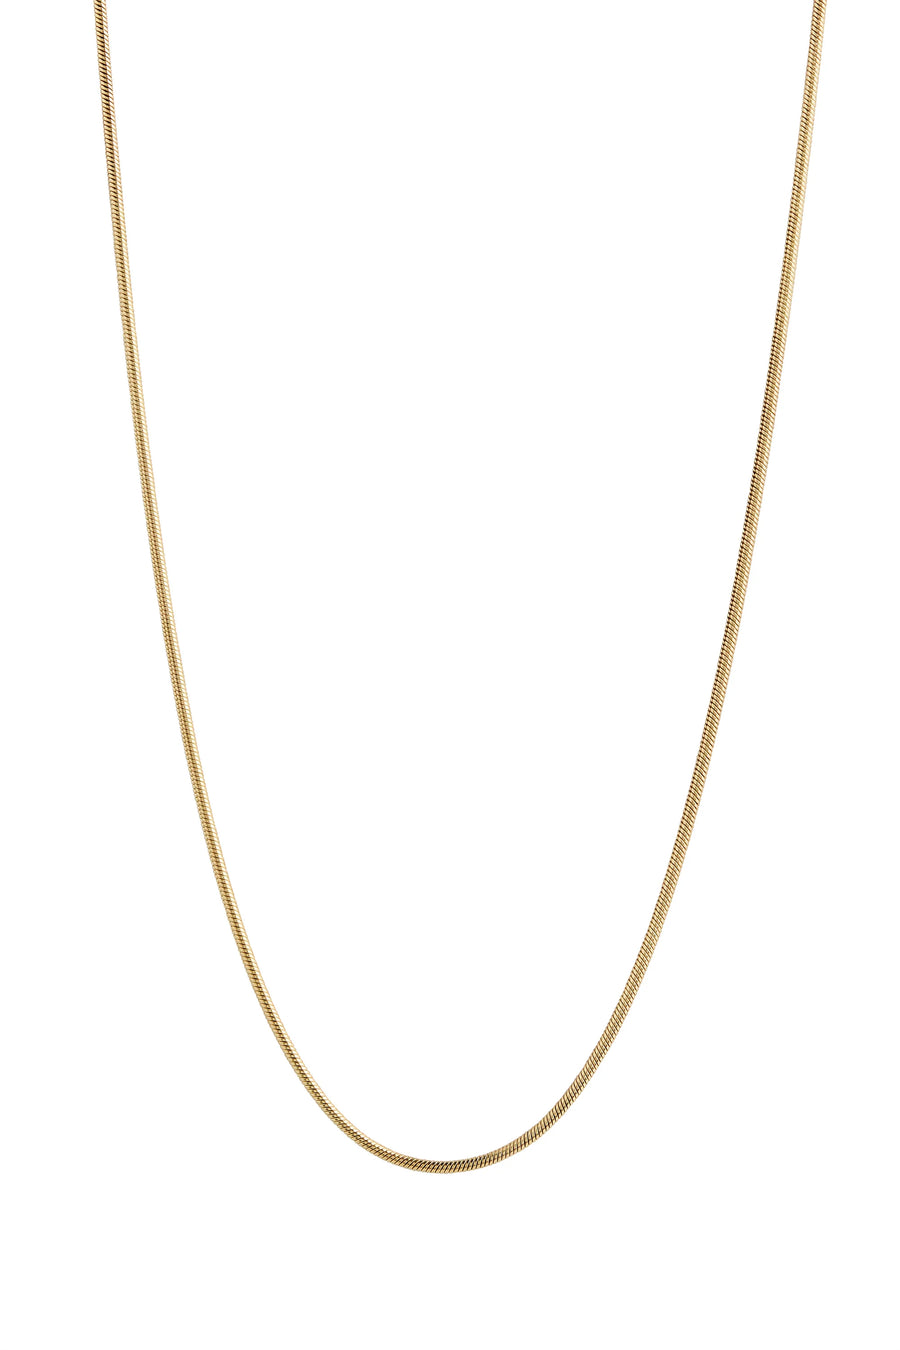 LISBETH JEWELRY - DARIA 2.0 NECKLACE - FILLED GOLD